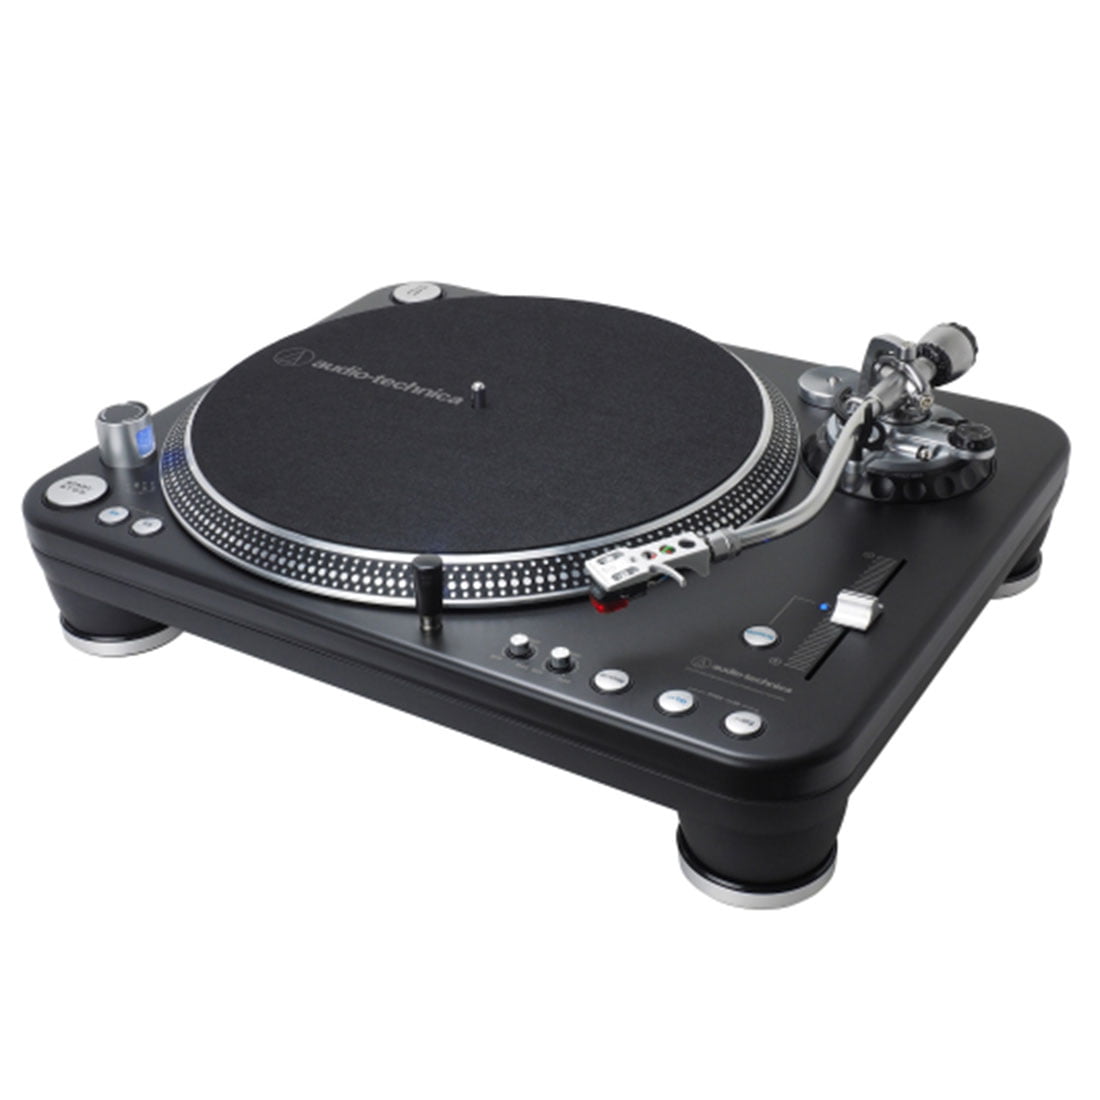 Audio-Technica AT-LP1240-USBXP Direct-Drive Professional DJ Turntable (USB and Analog)